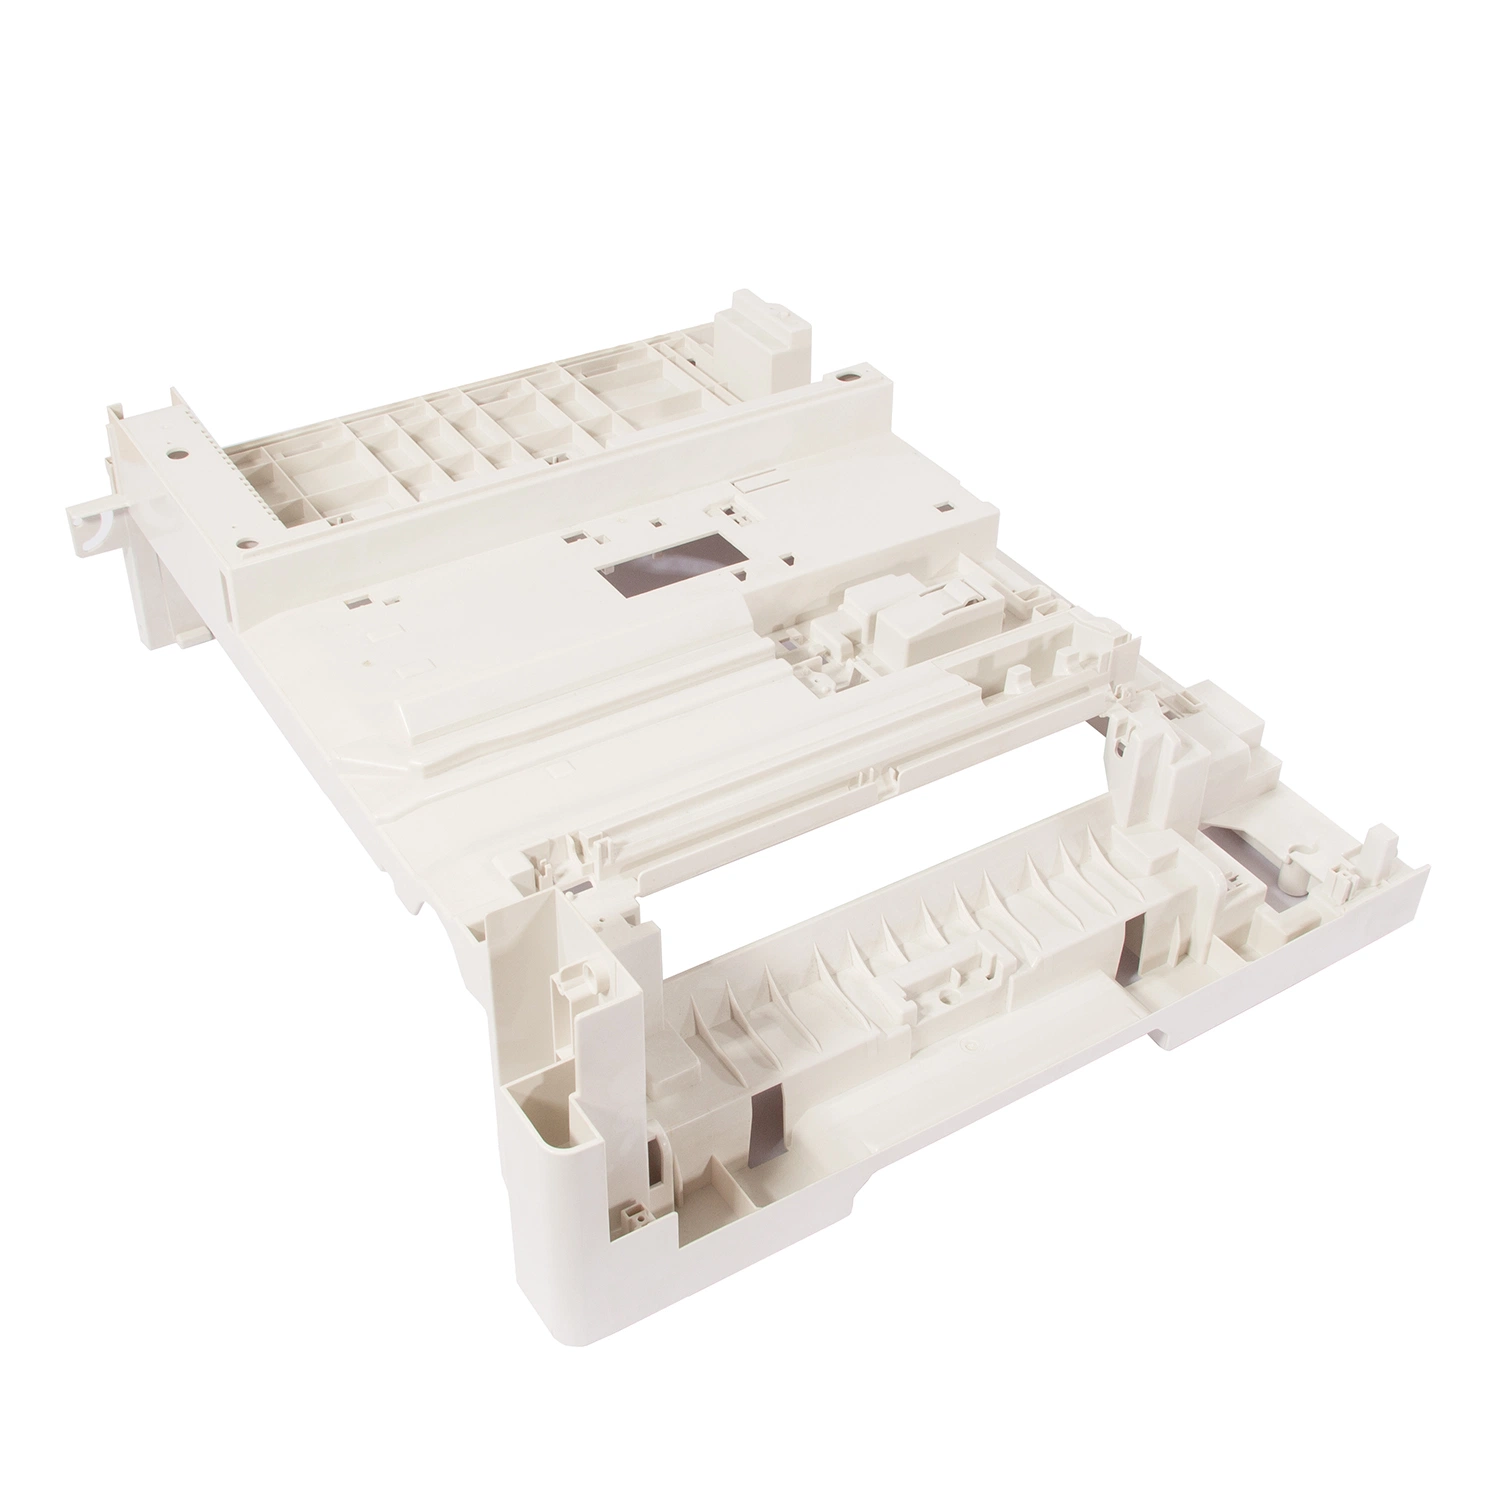 Design and Manufacture ABS, Nylon Injection Molding Production Printer Shell Mold